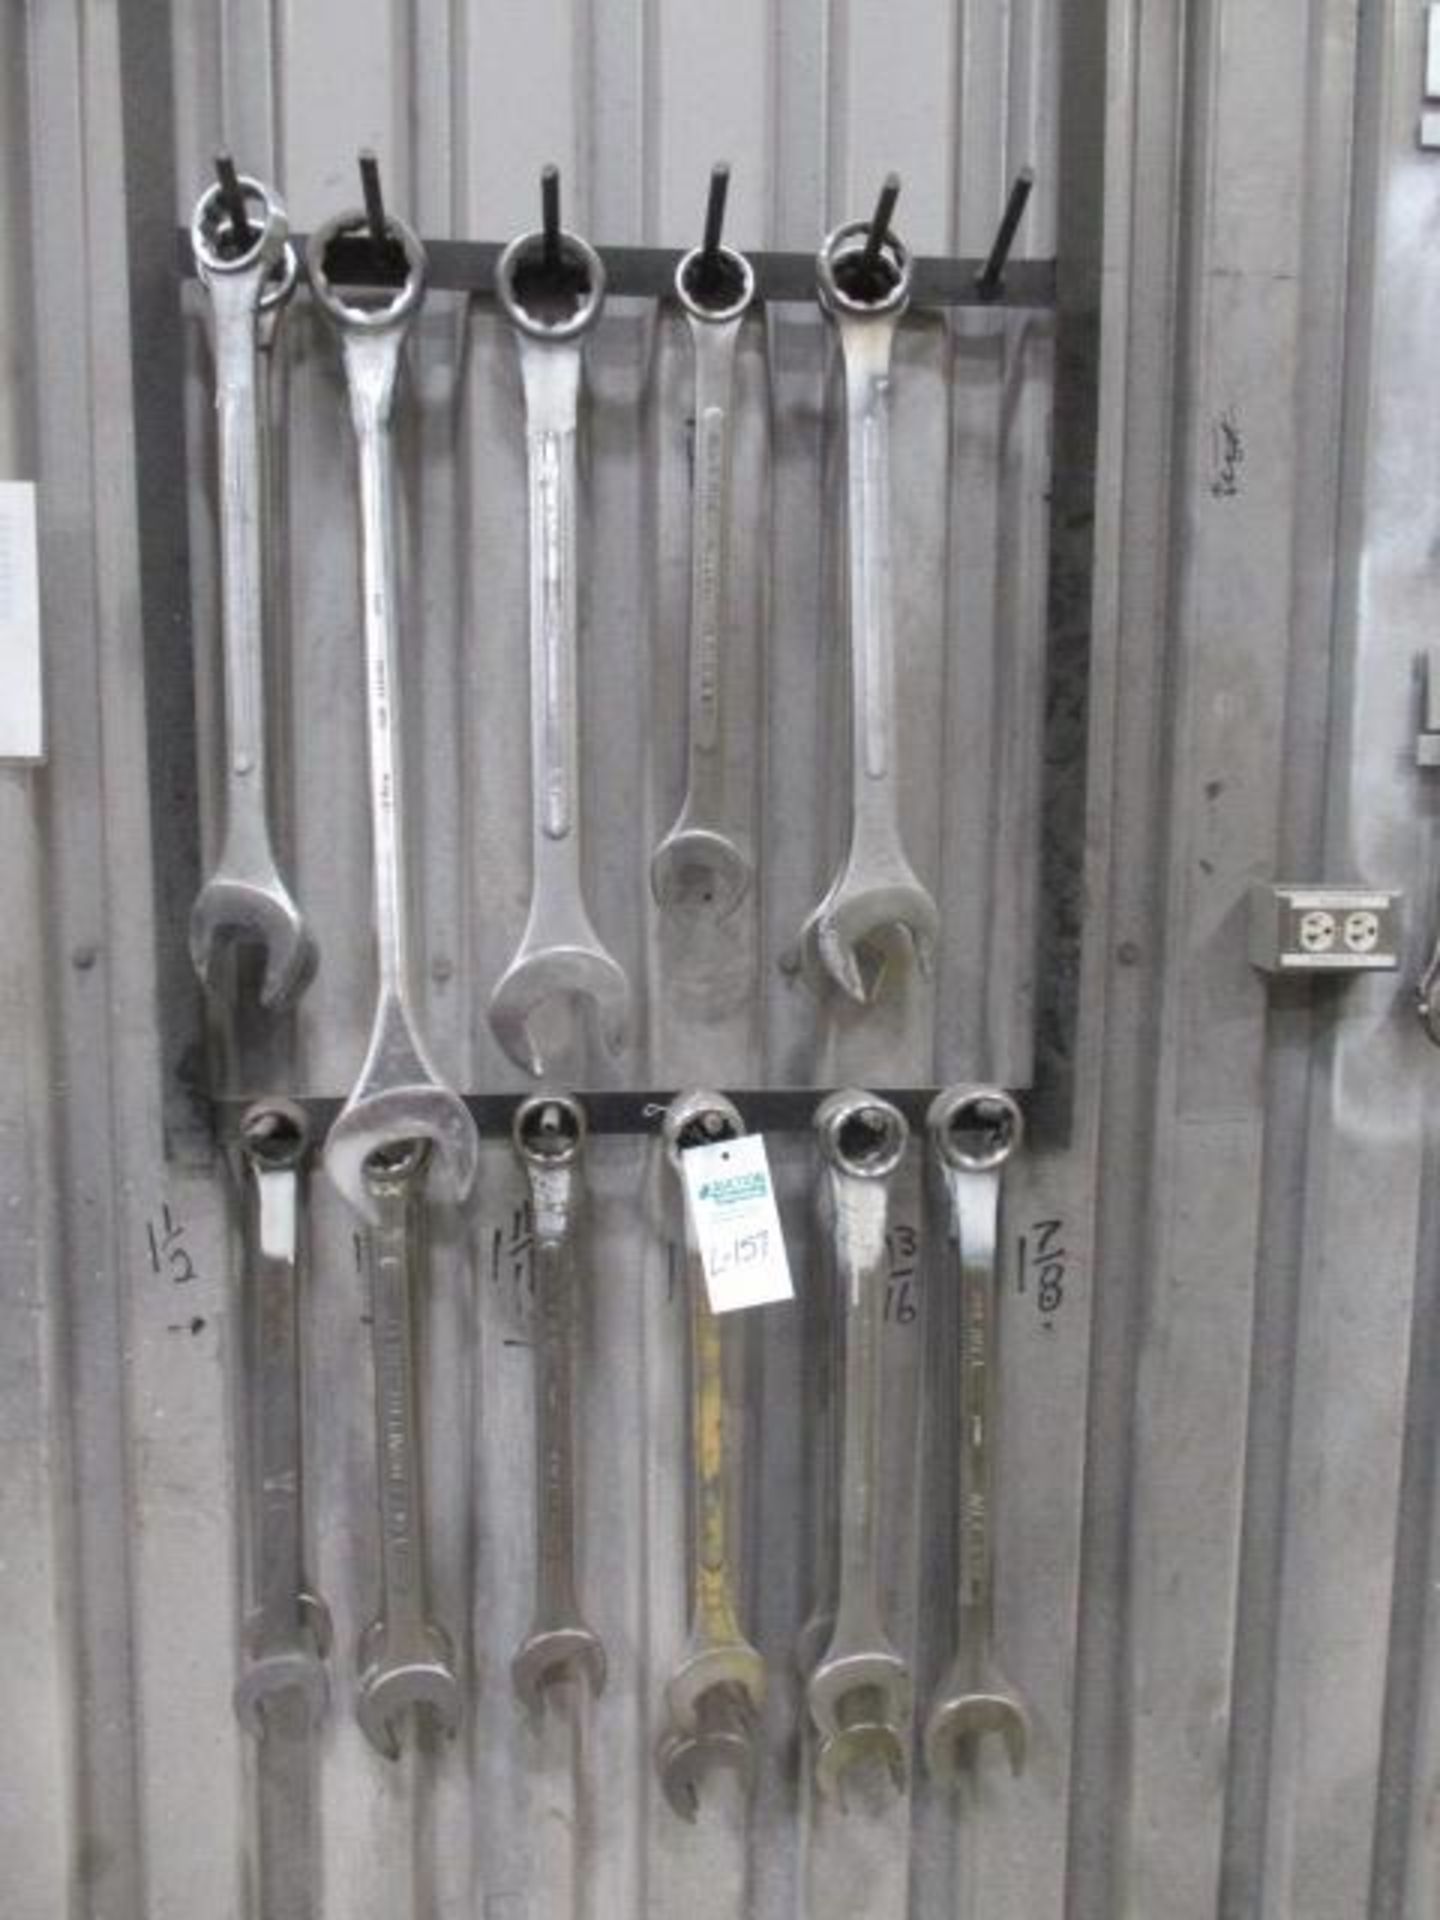 Wall Lot of Large Size Wrenches aprox 23